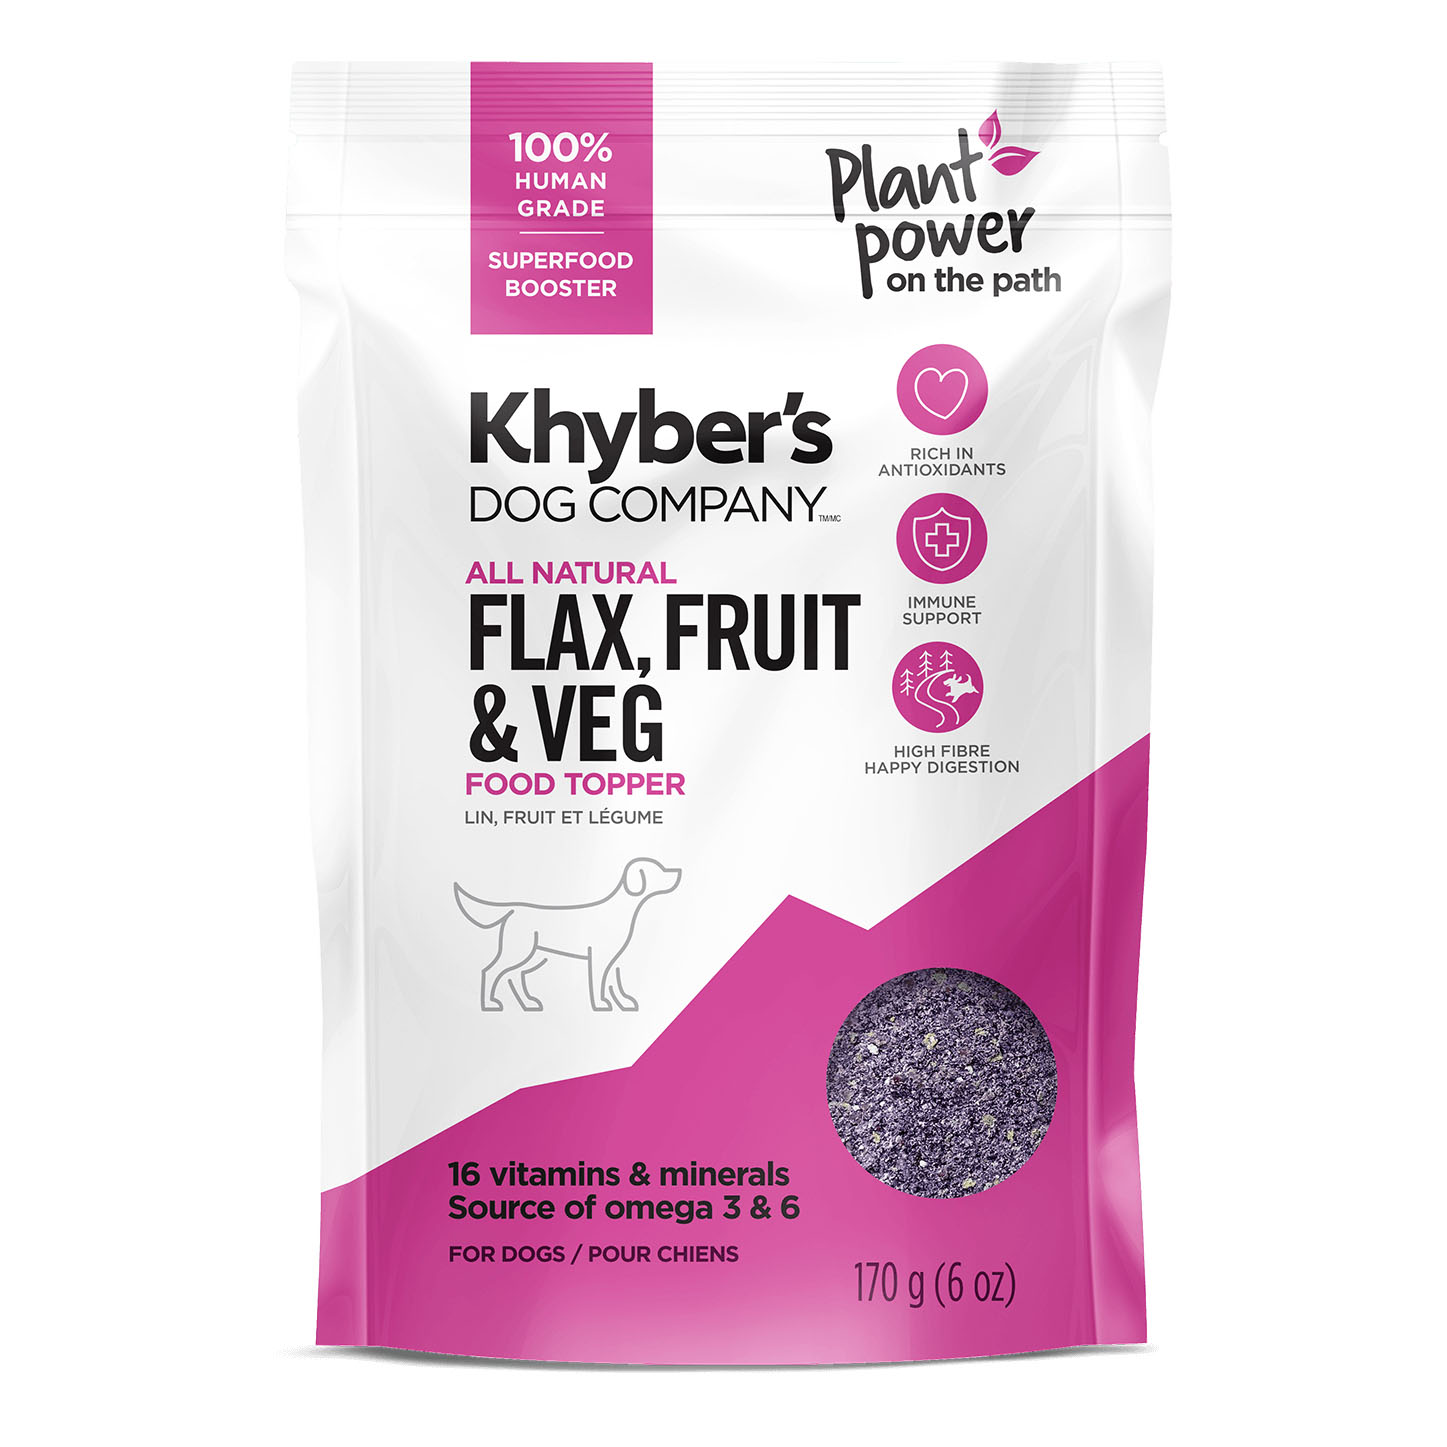 Featured image for “All Natural Flax, Fruit  & Veg Superfood Topper”